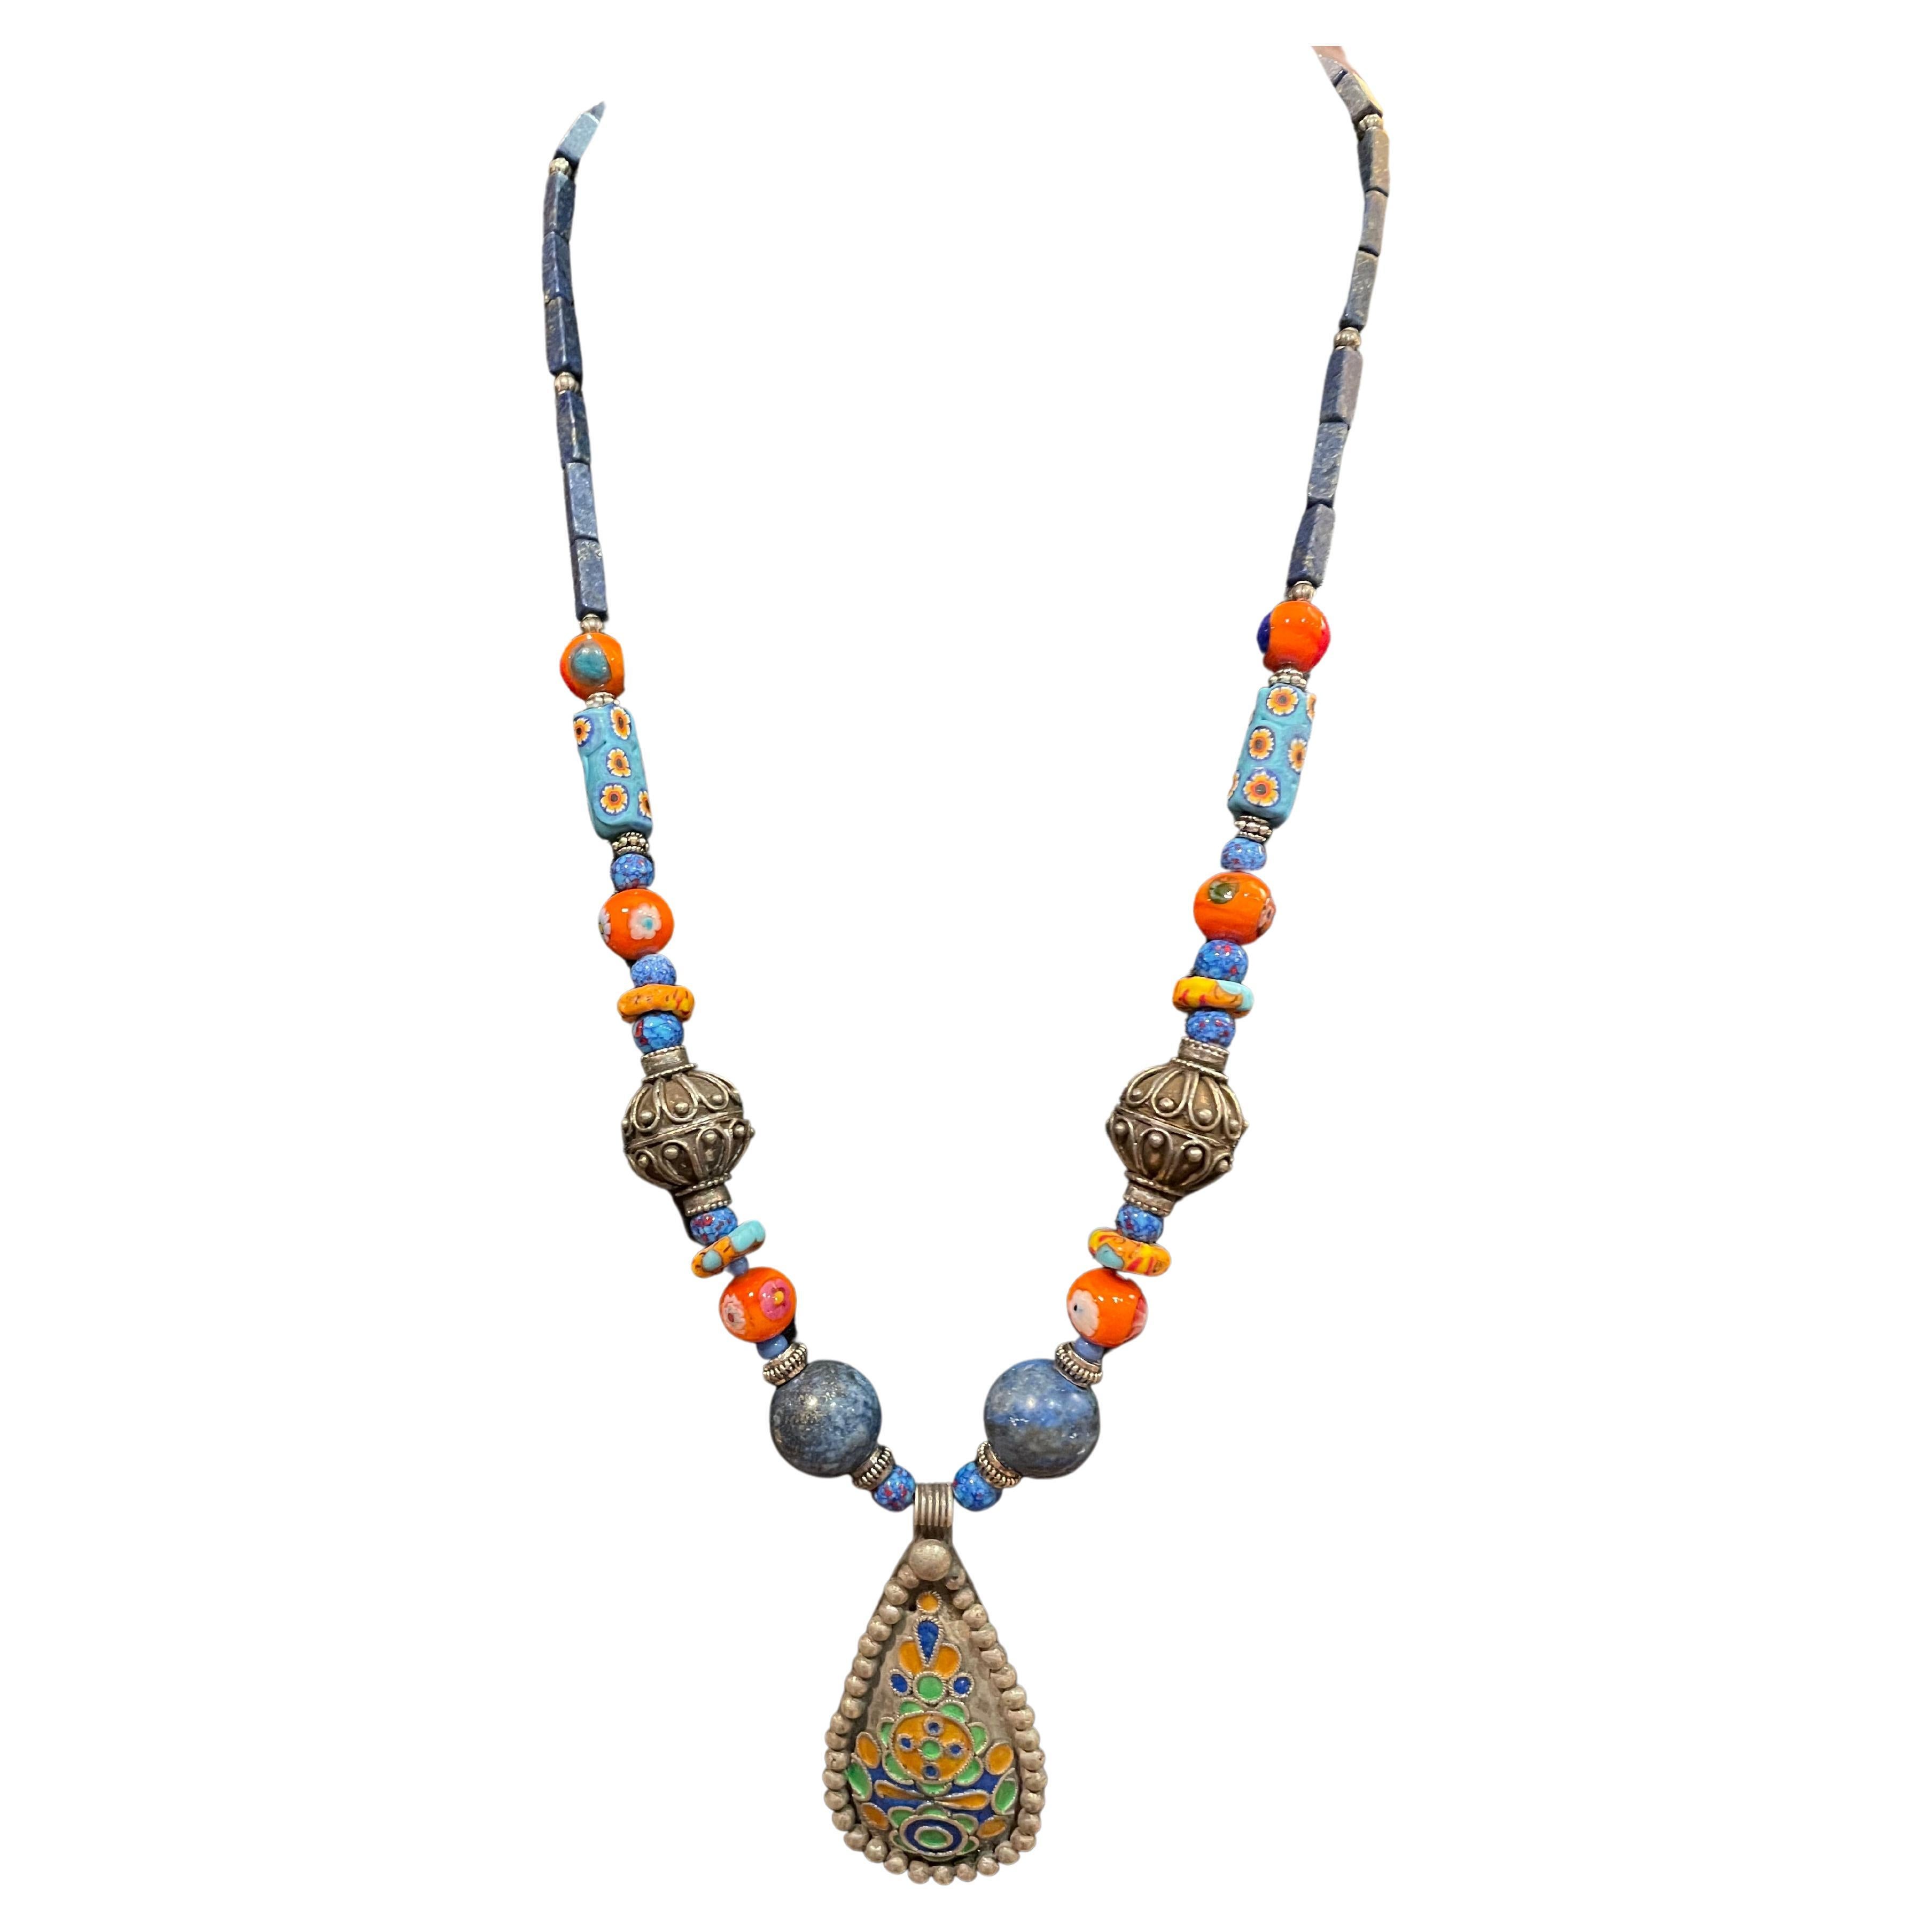 LB offers an antique Moroccan, enamel pendant with lapis /silver beads necklace For Sale